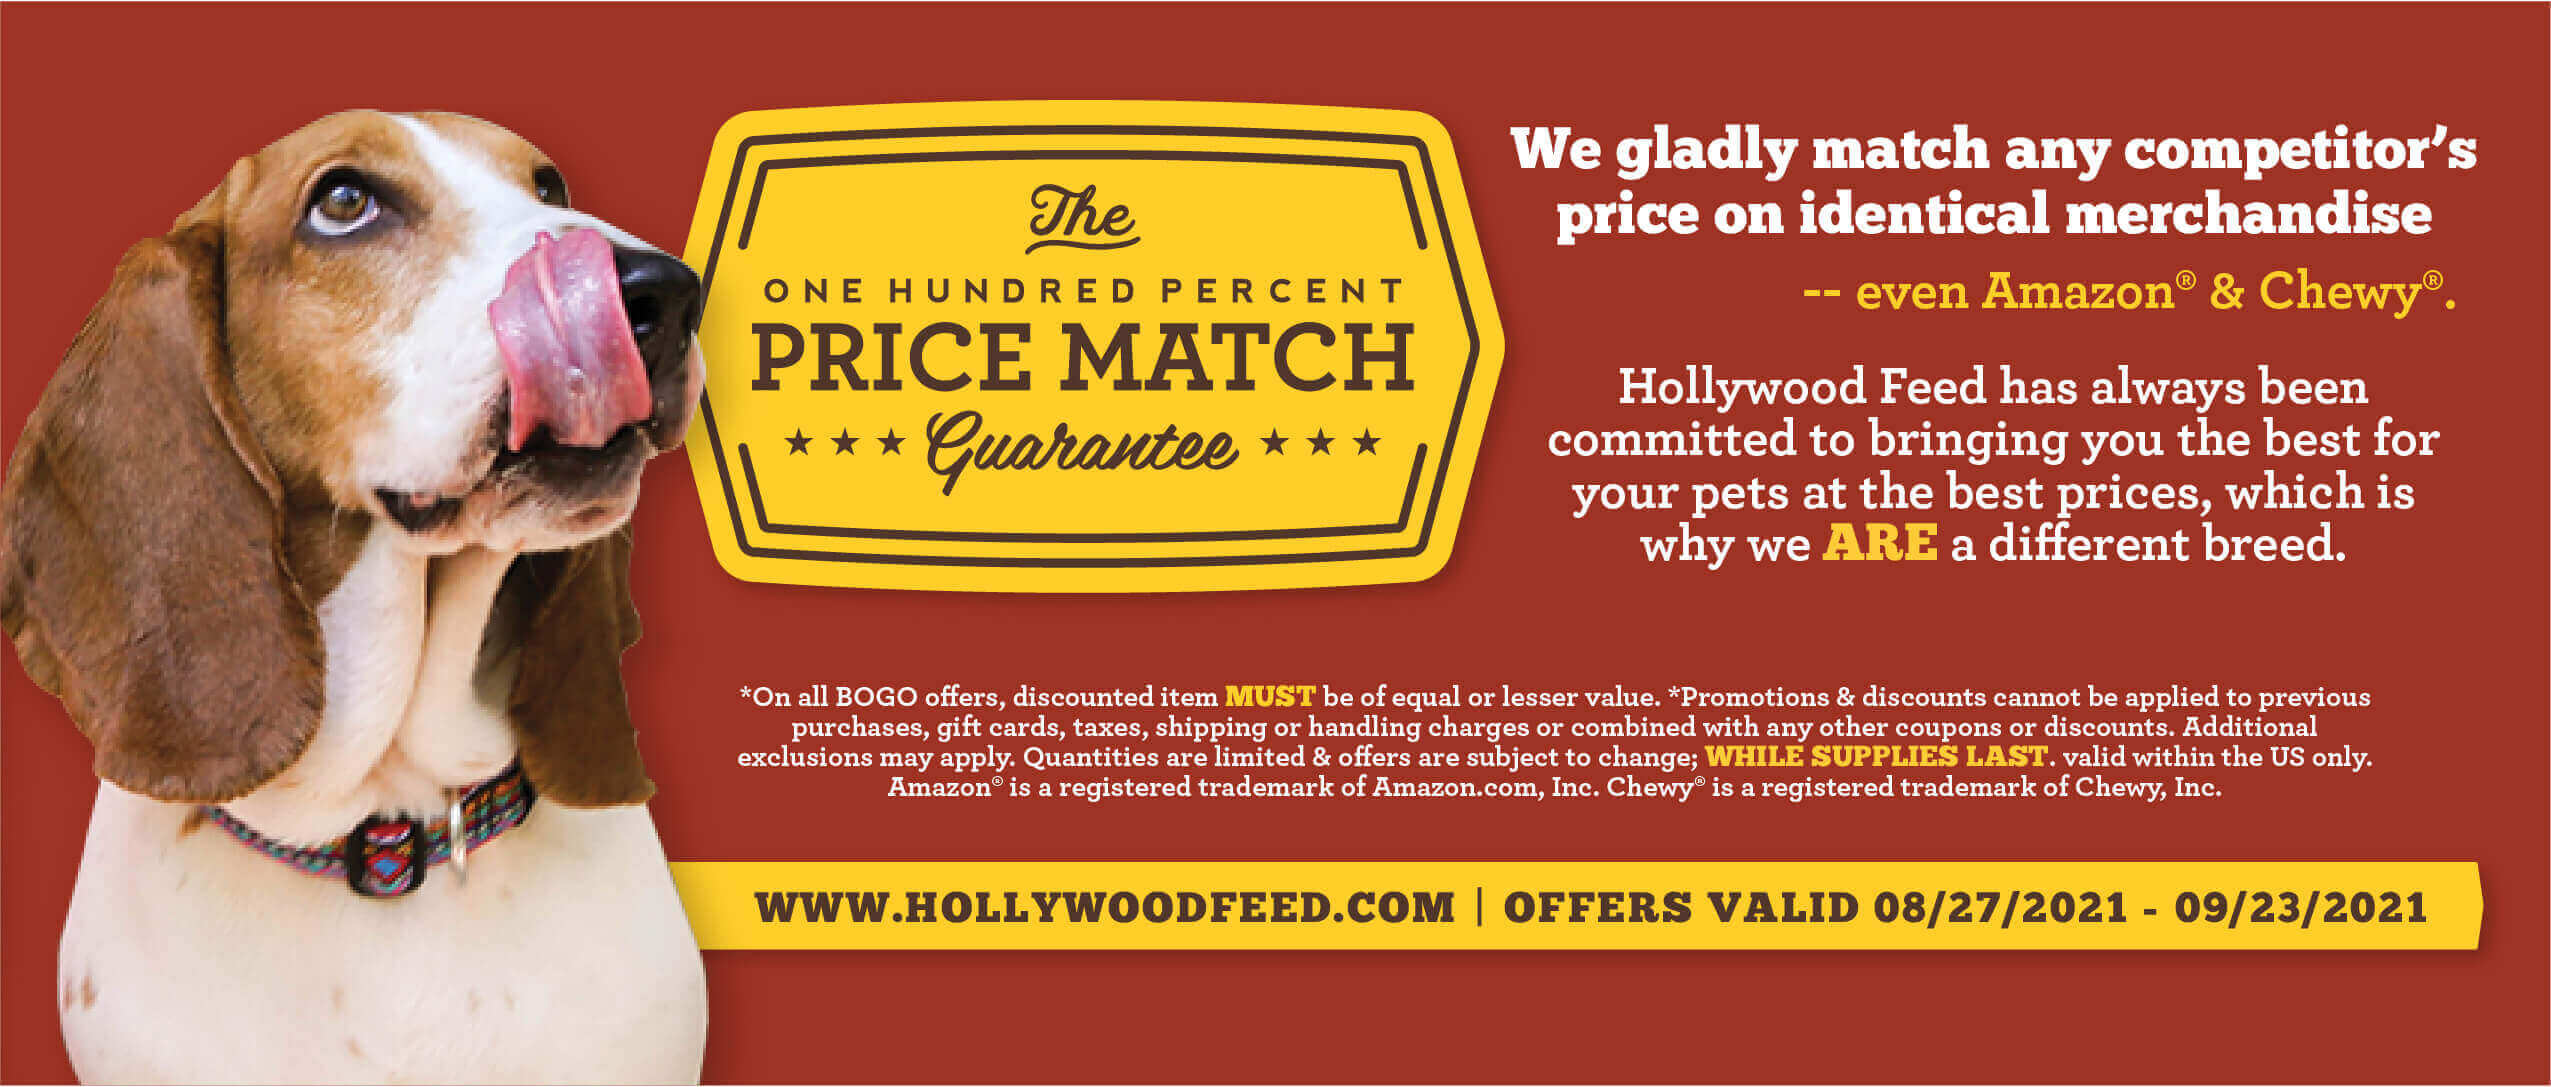 Footer - Price Match Guarantee - We gladly match any competitor's price on identical merchandise.